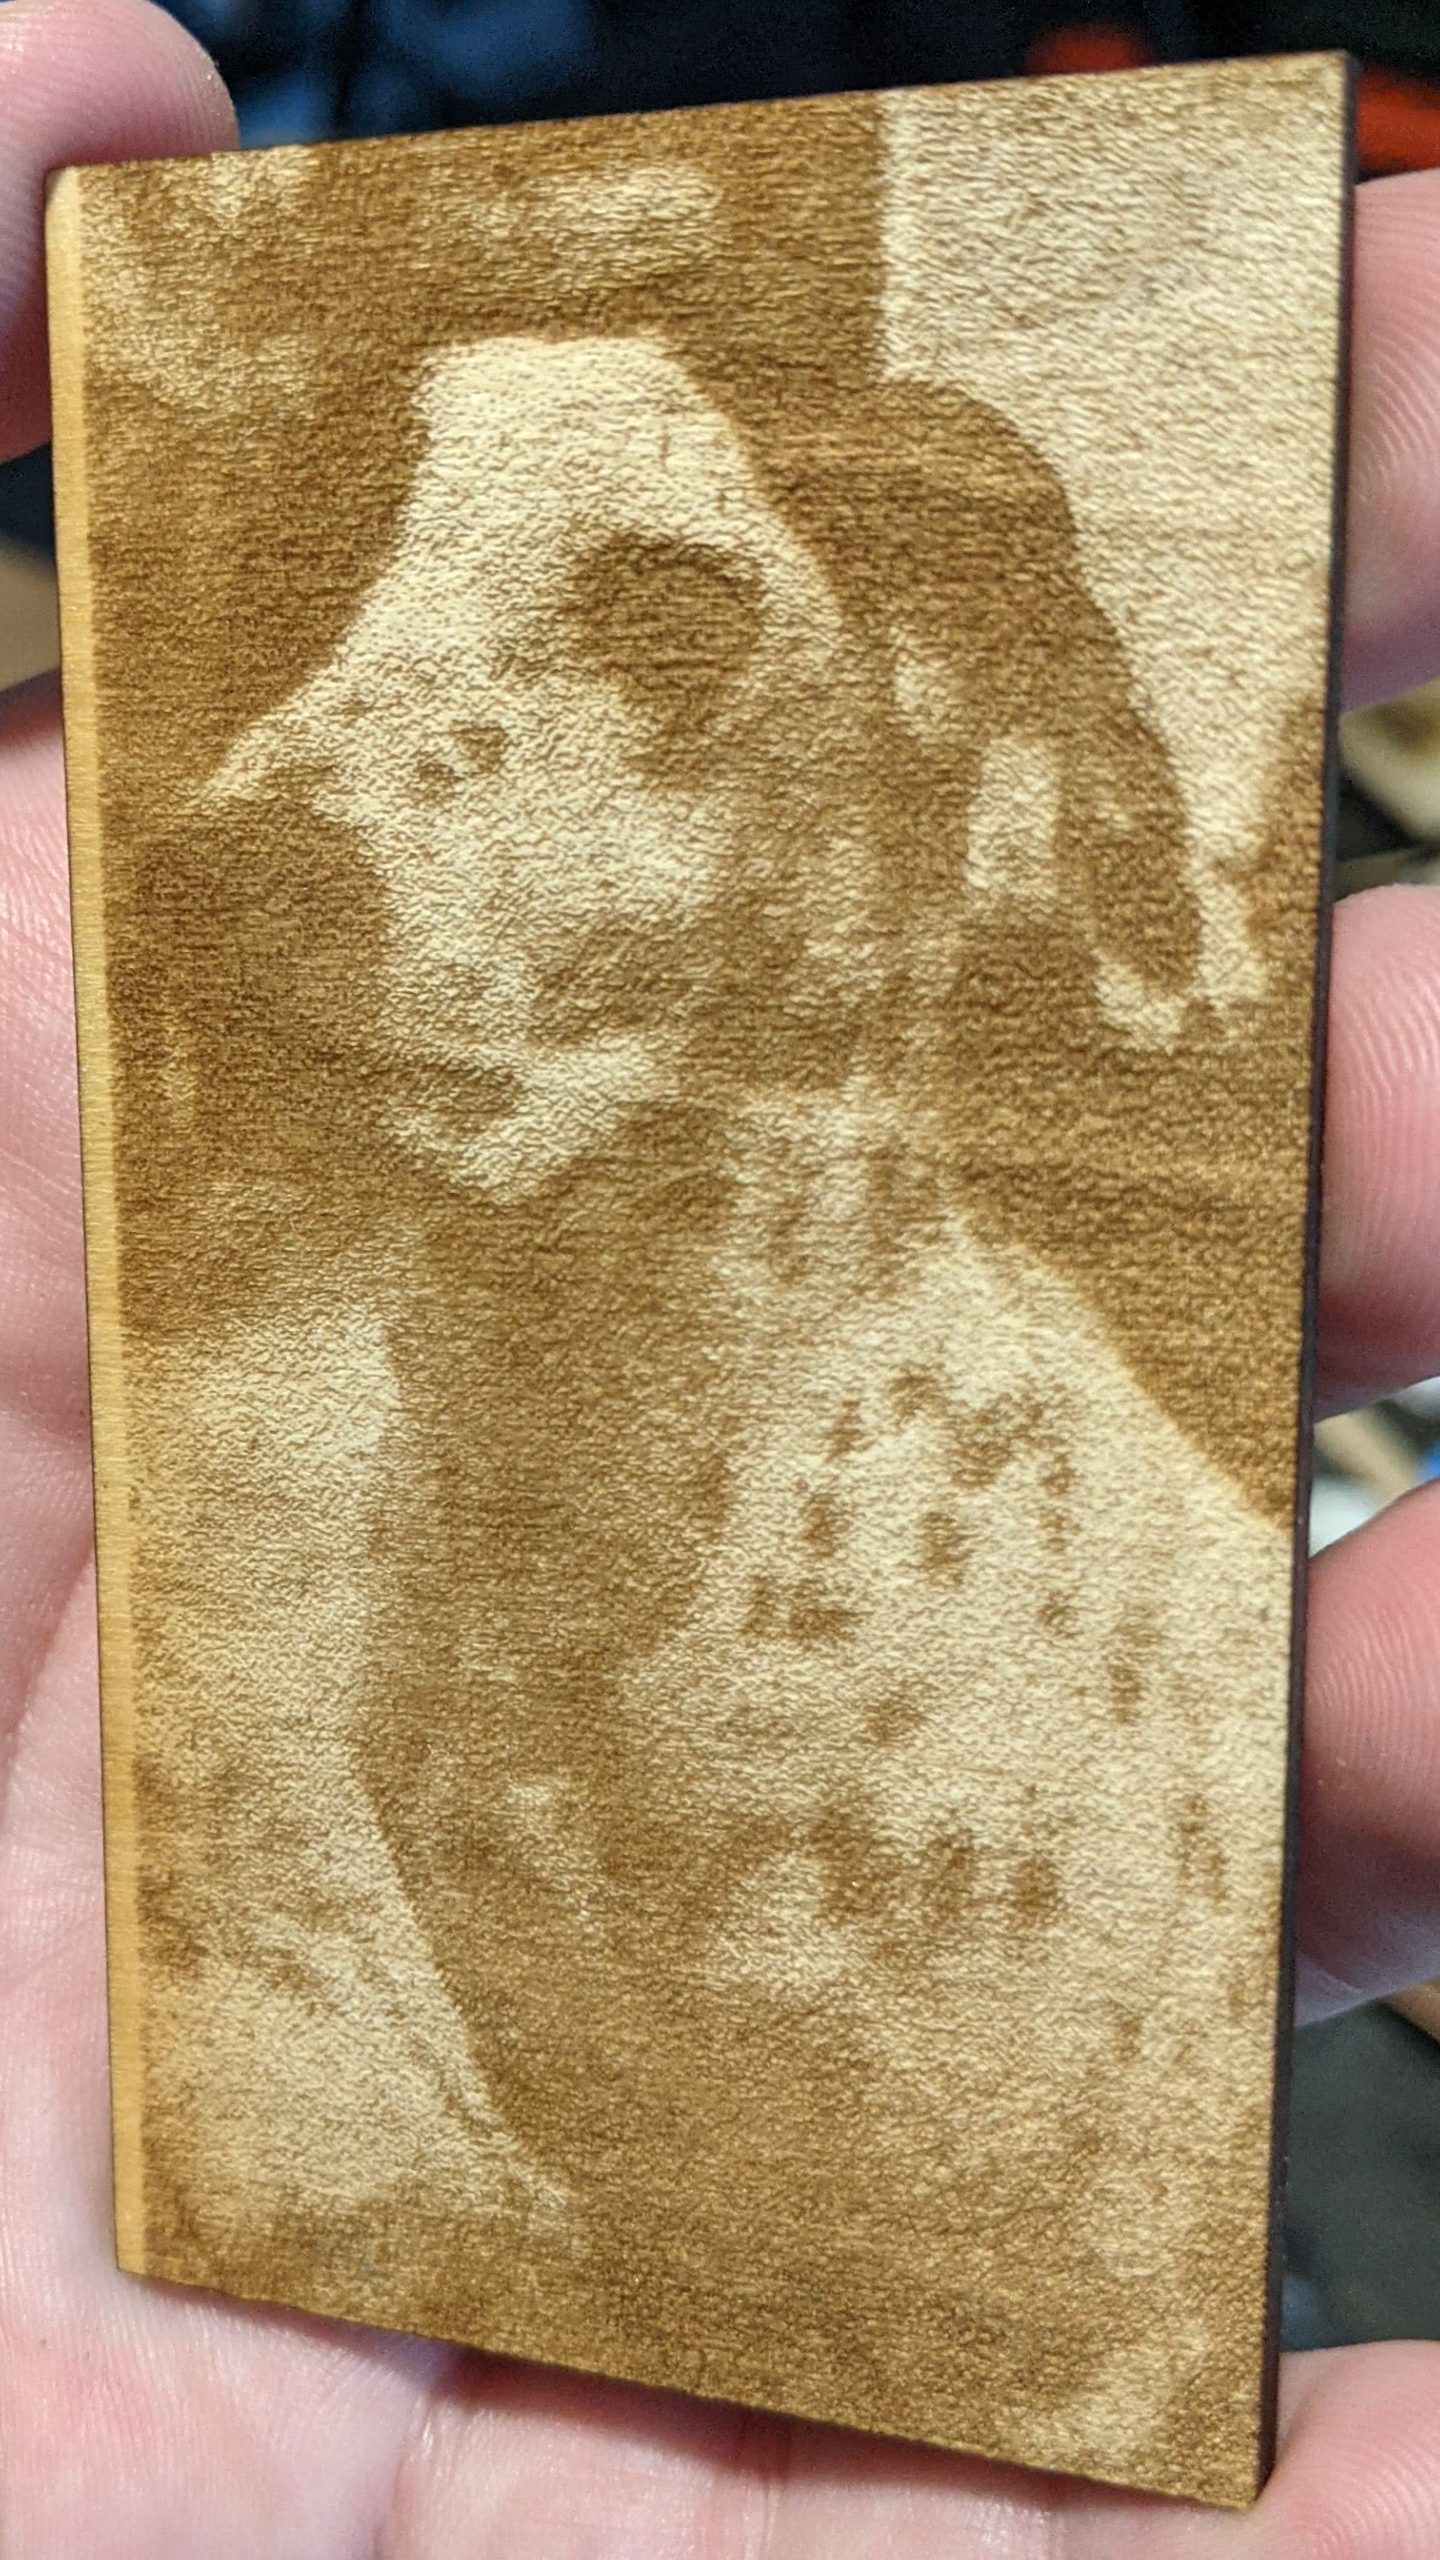 Photo of my dog Handsome Jack engraved on birch plywood showing skipped steps